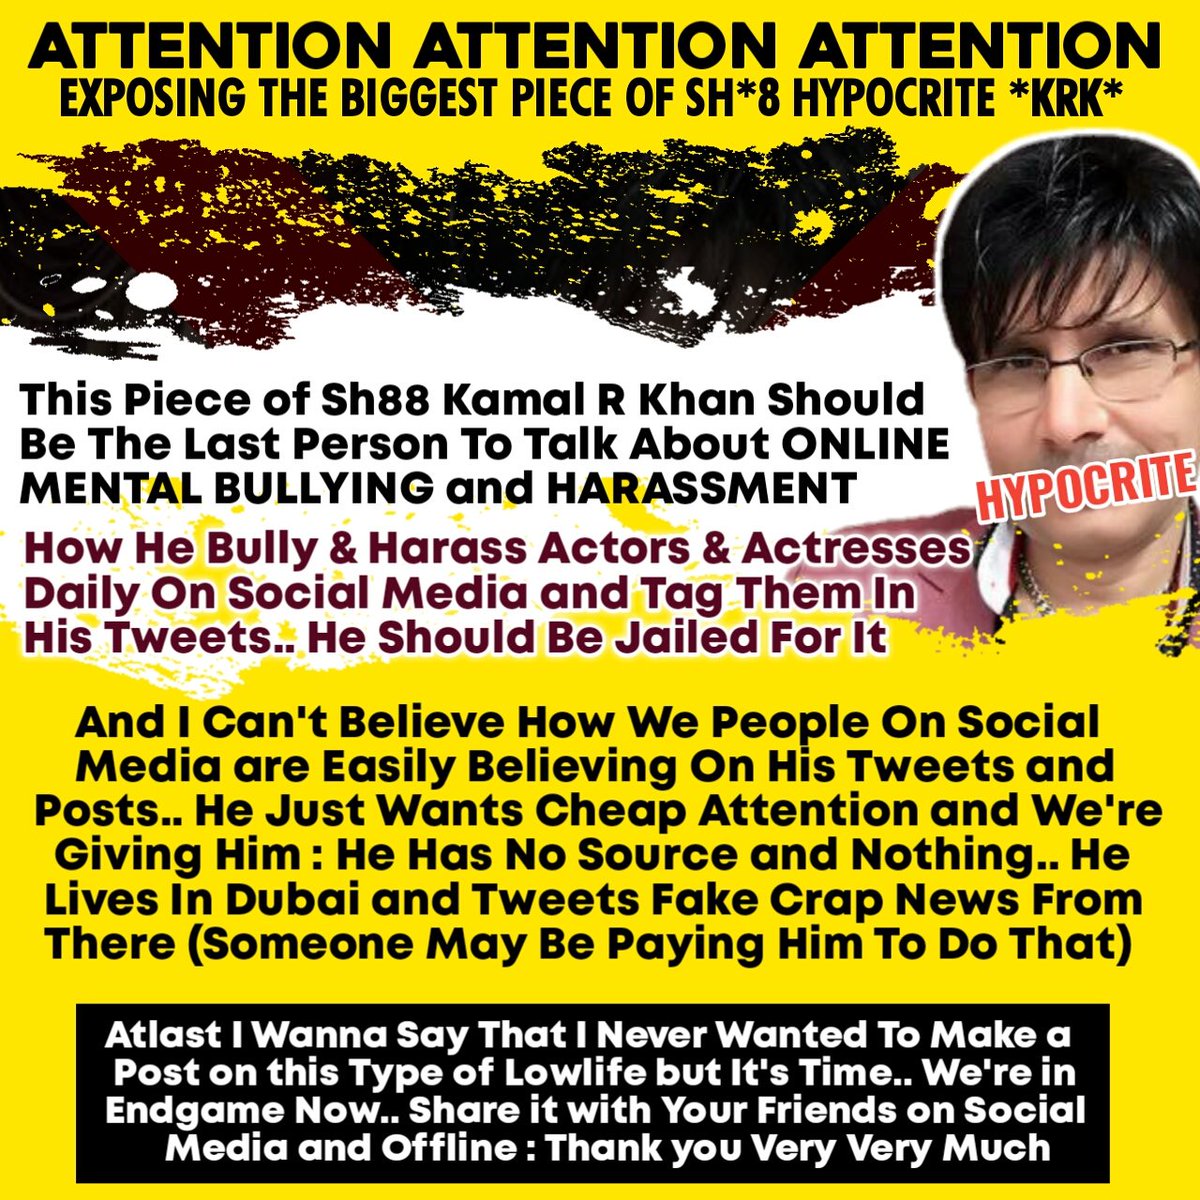 EXPOSING KRK - 6At last I Want To Say That, Leave Everything, First Jail This Mother Fkr Who Always Bully Bollywood Actors On Twitter and YouTube and Mentally Harasses Them Online!ARREST  @kamaalrkhan #FakeKRKRealCulpritOfSushant